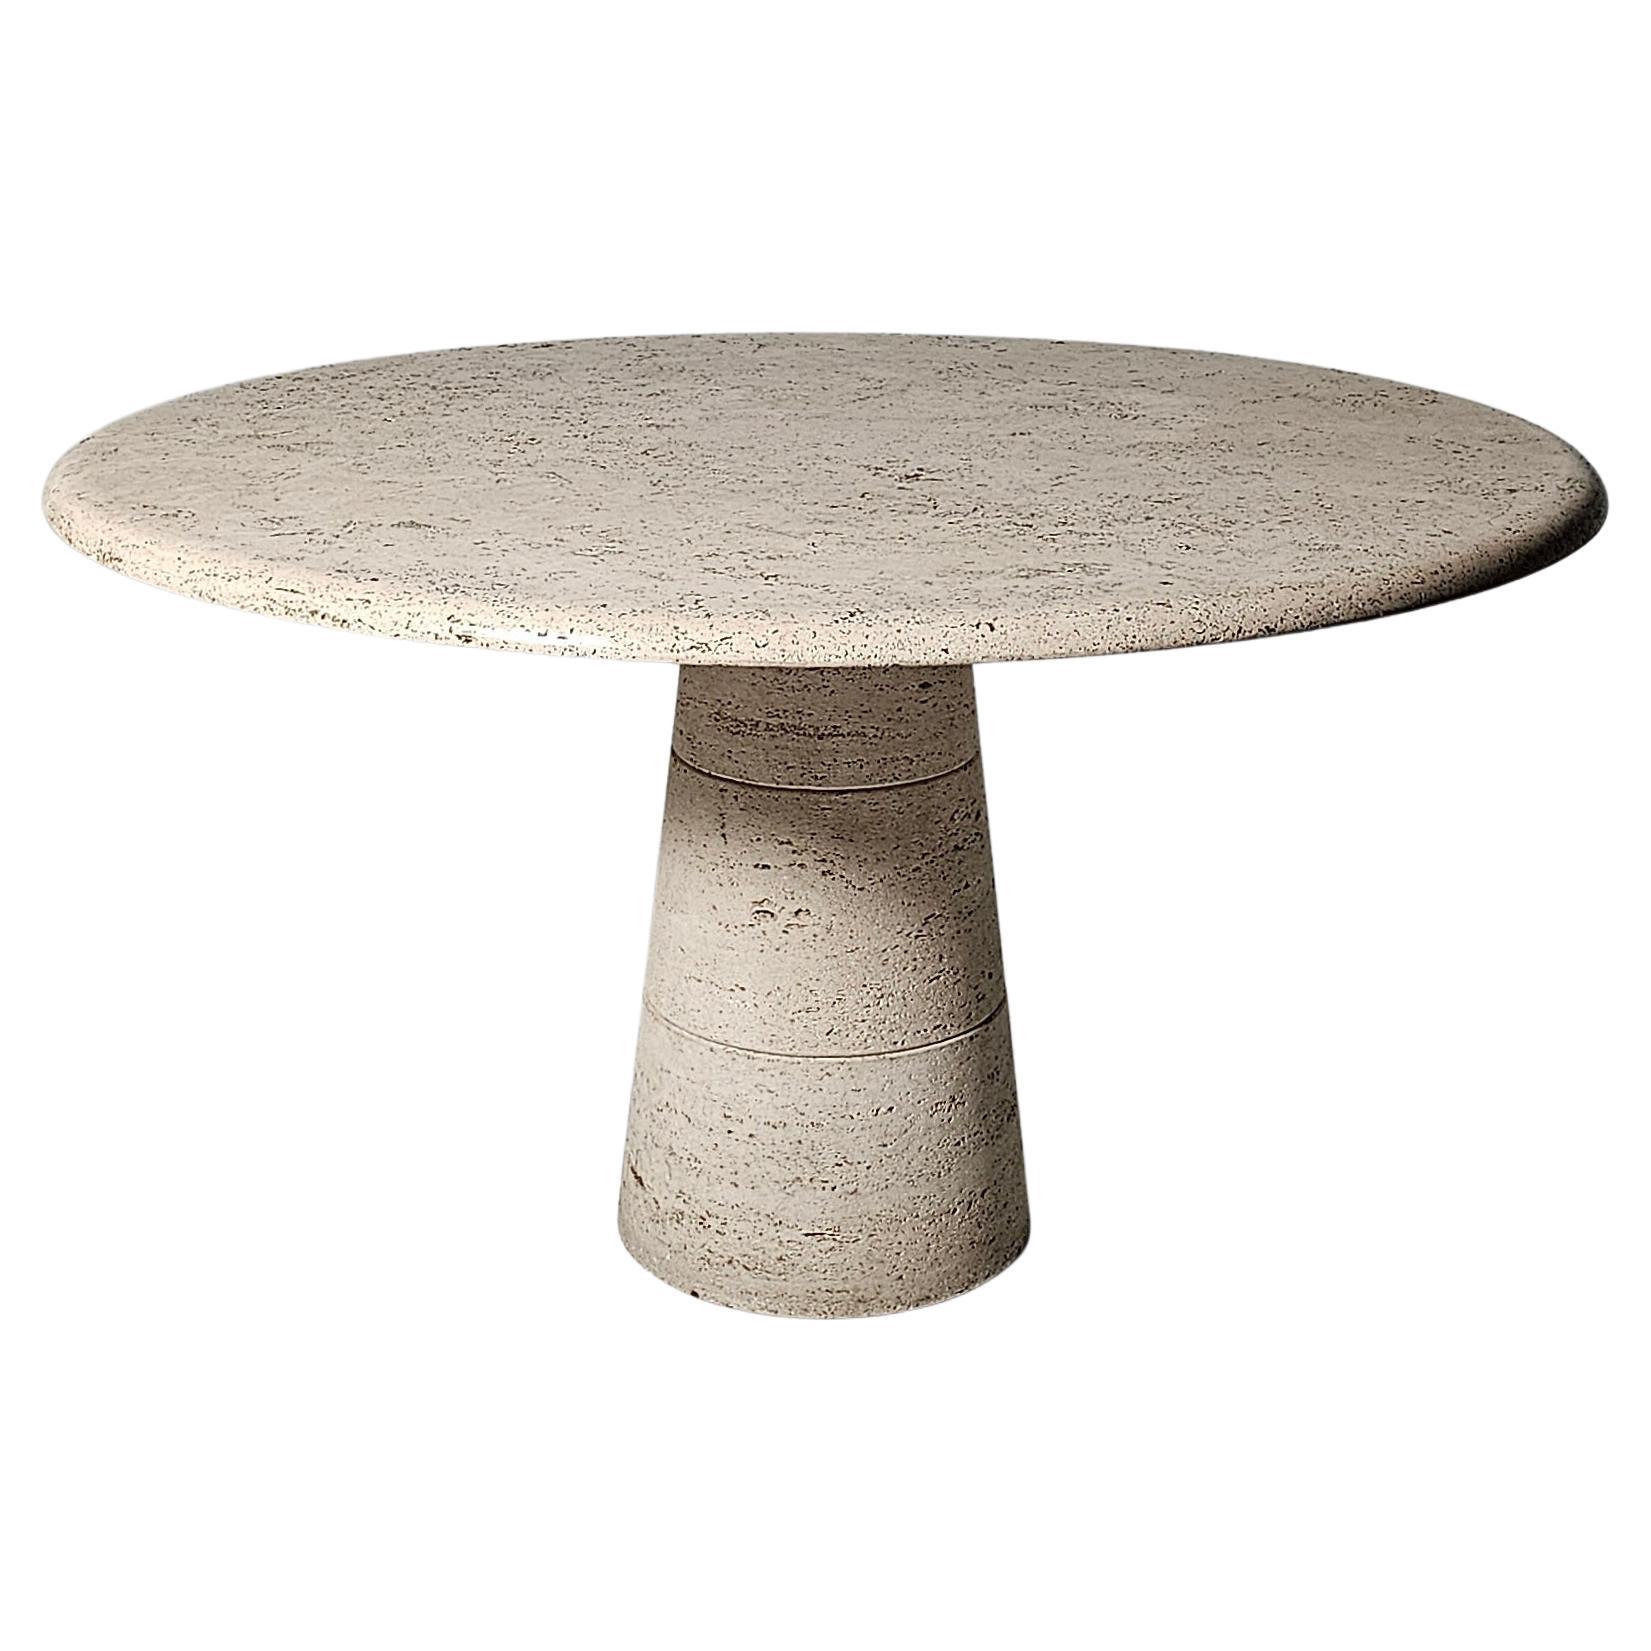 Travertine round dining table by Angelo Mangiarotti for Up&Up, 1970s For Sale